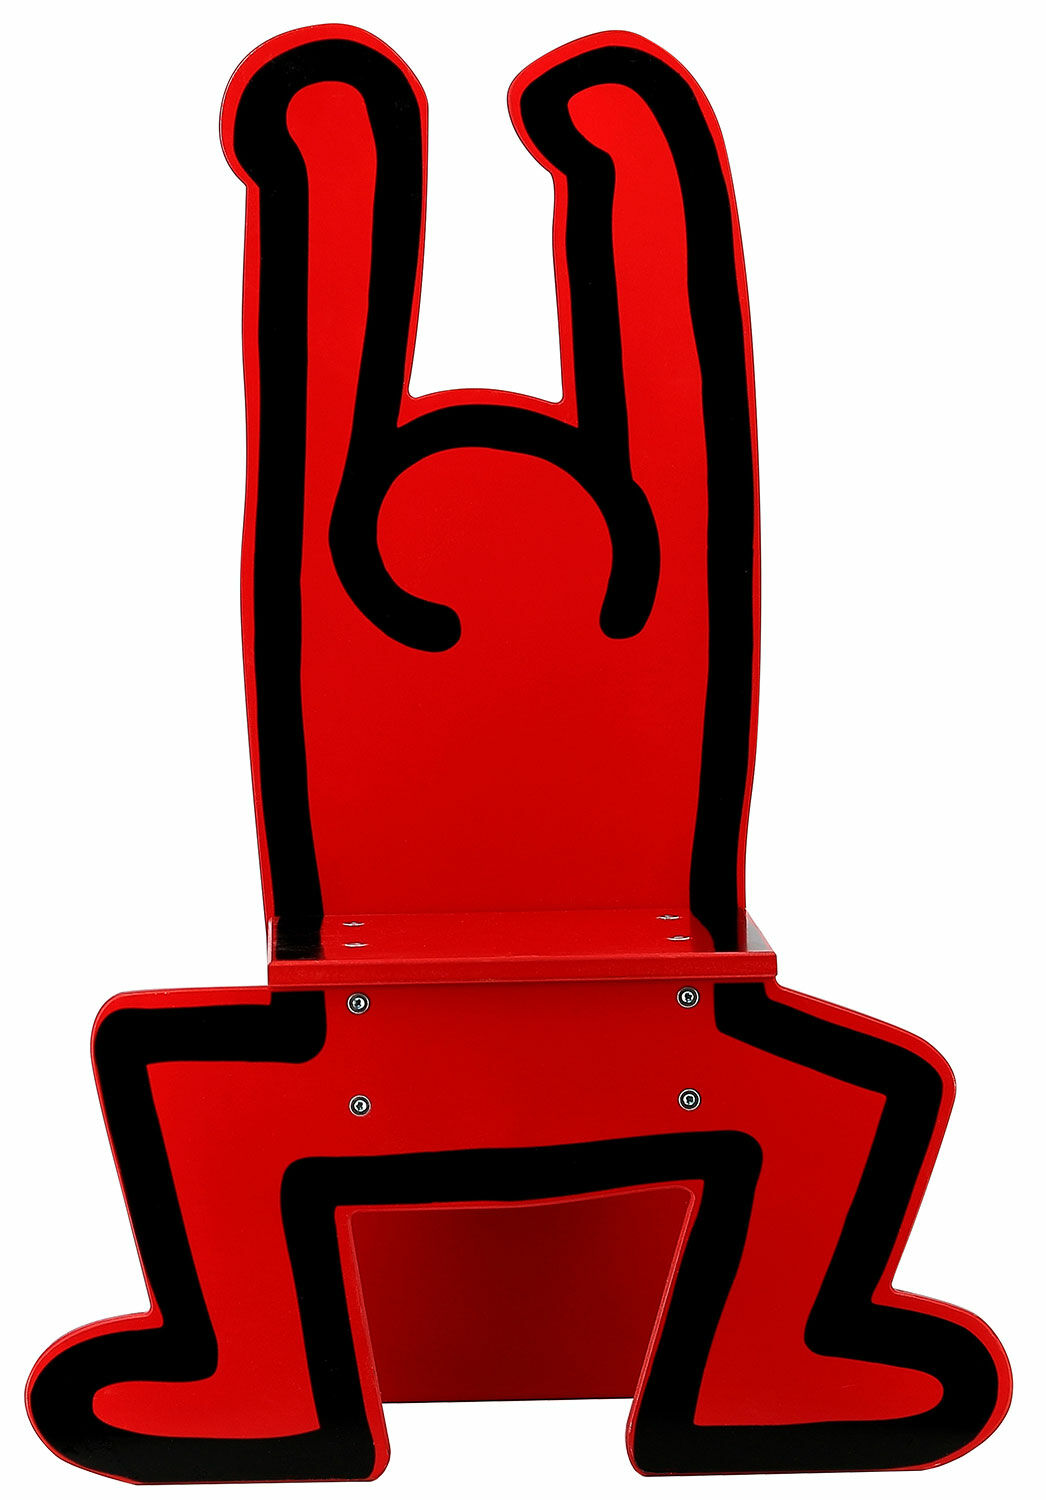 Chaise pour enfants "Keith Haring", version rouge